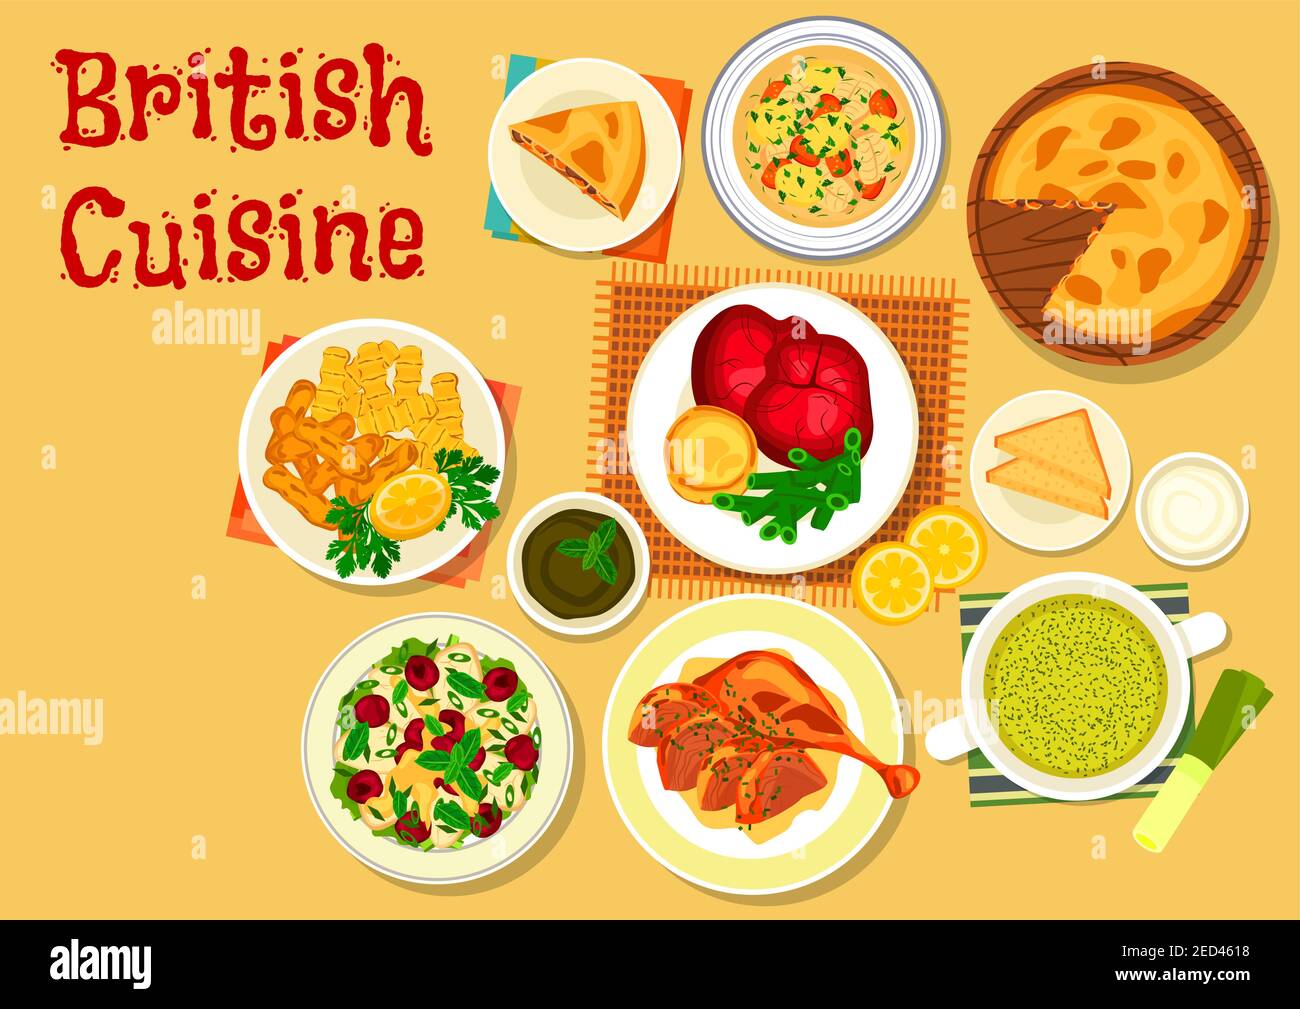 British cuisine traditional roast beef with yorkshire pudding icon with irish fish soup, chicken salad with cherry fruit, fish and chips, duck with mi Stock Vector